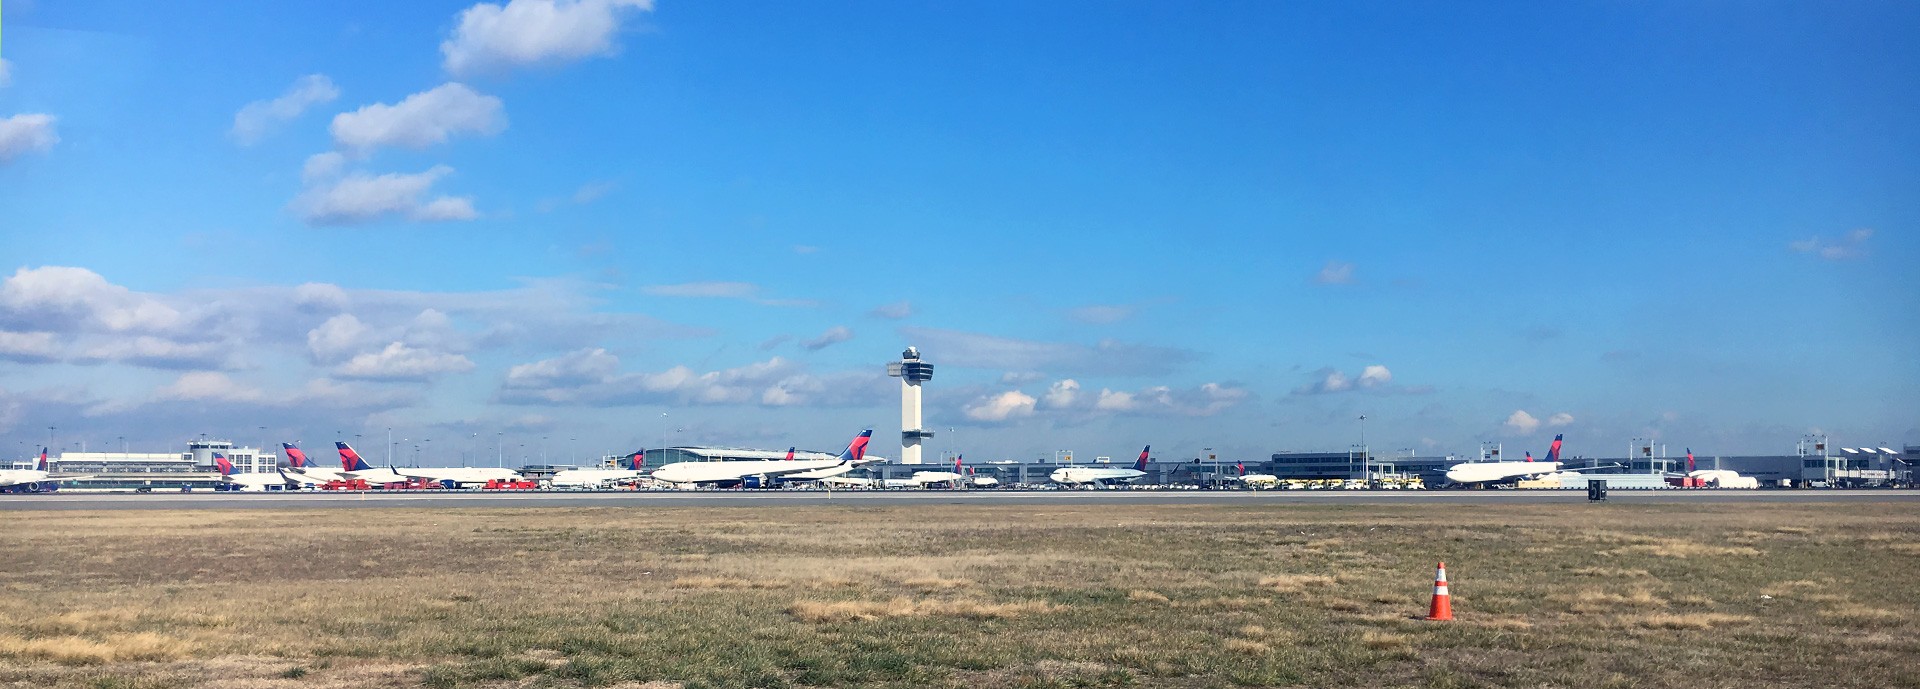 distant view of jfk airport with planes on runway